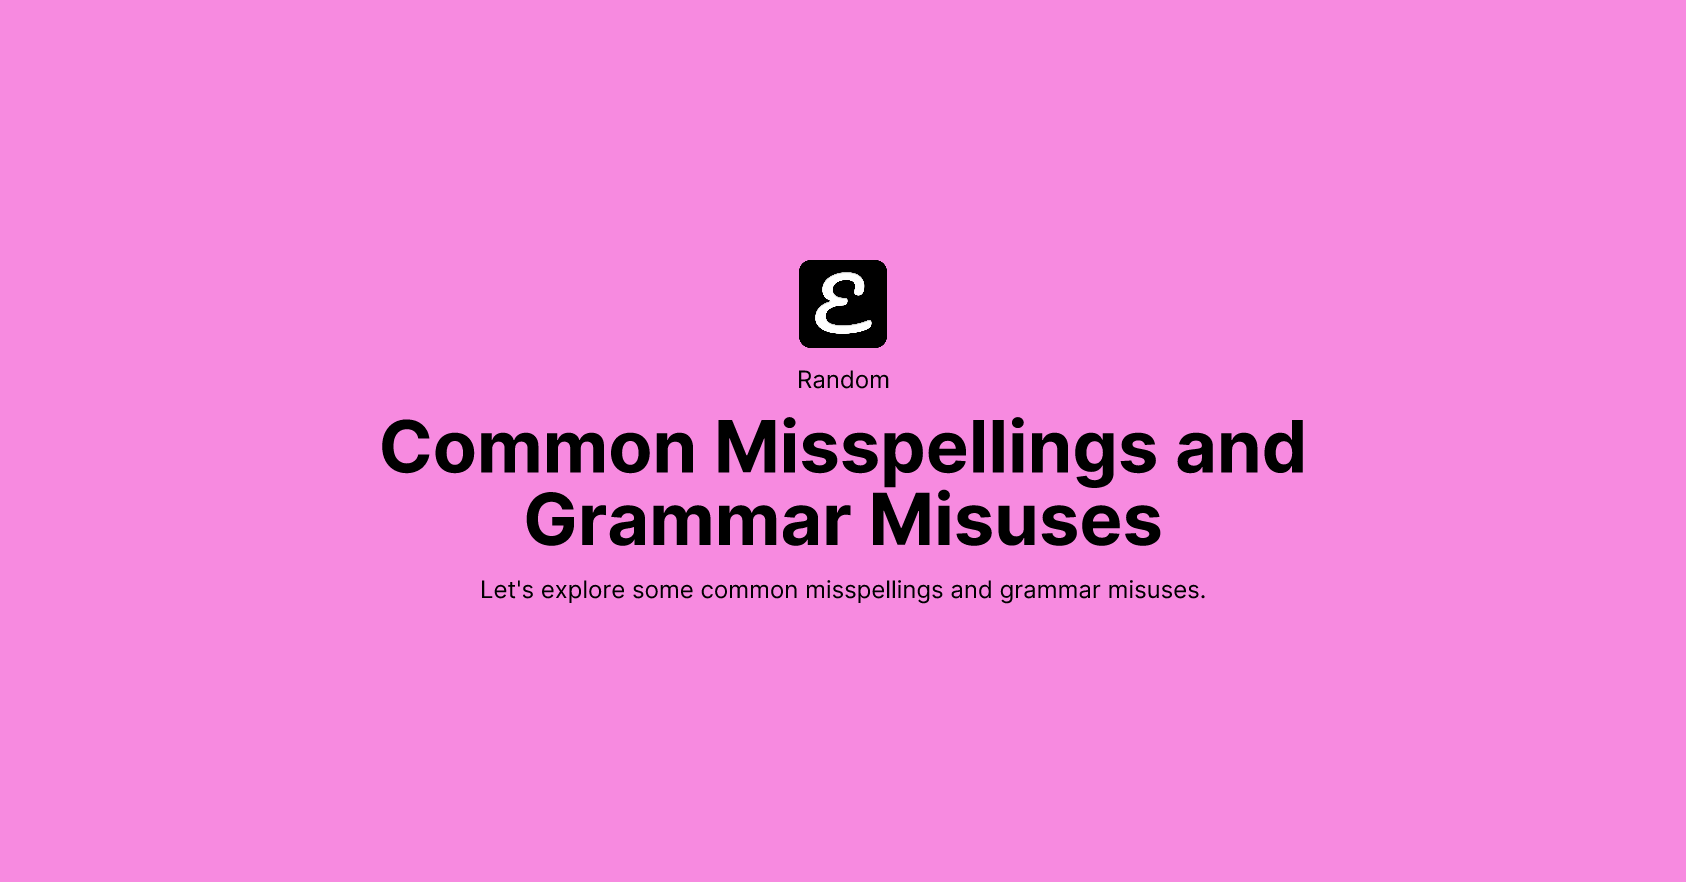 Common Misspellings and Grammar Misuses by Eric David Smith